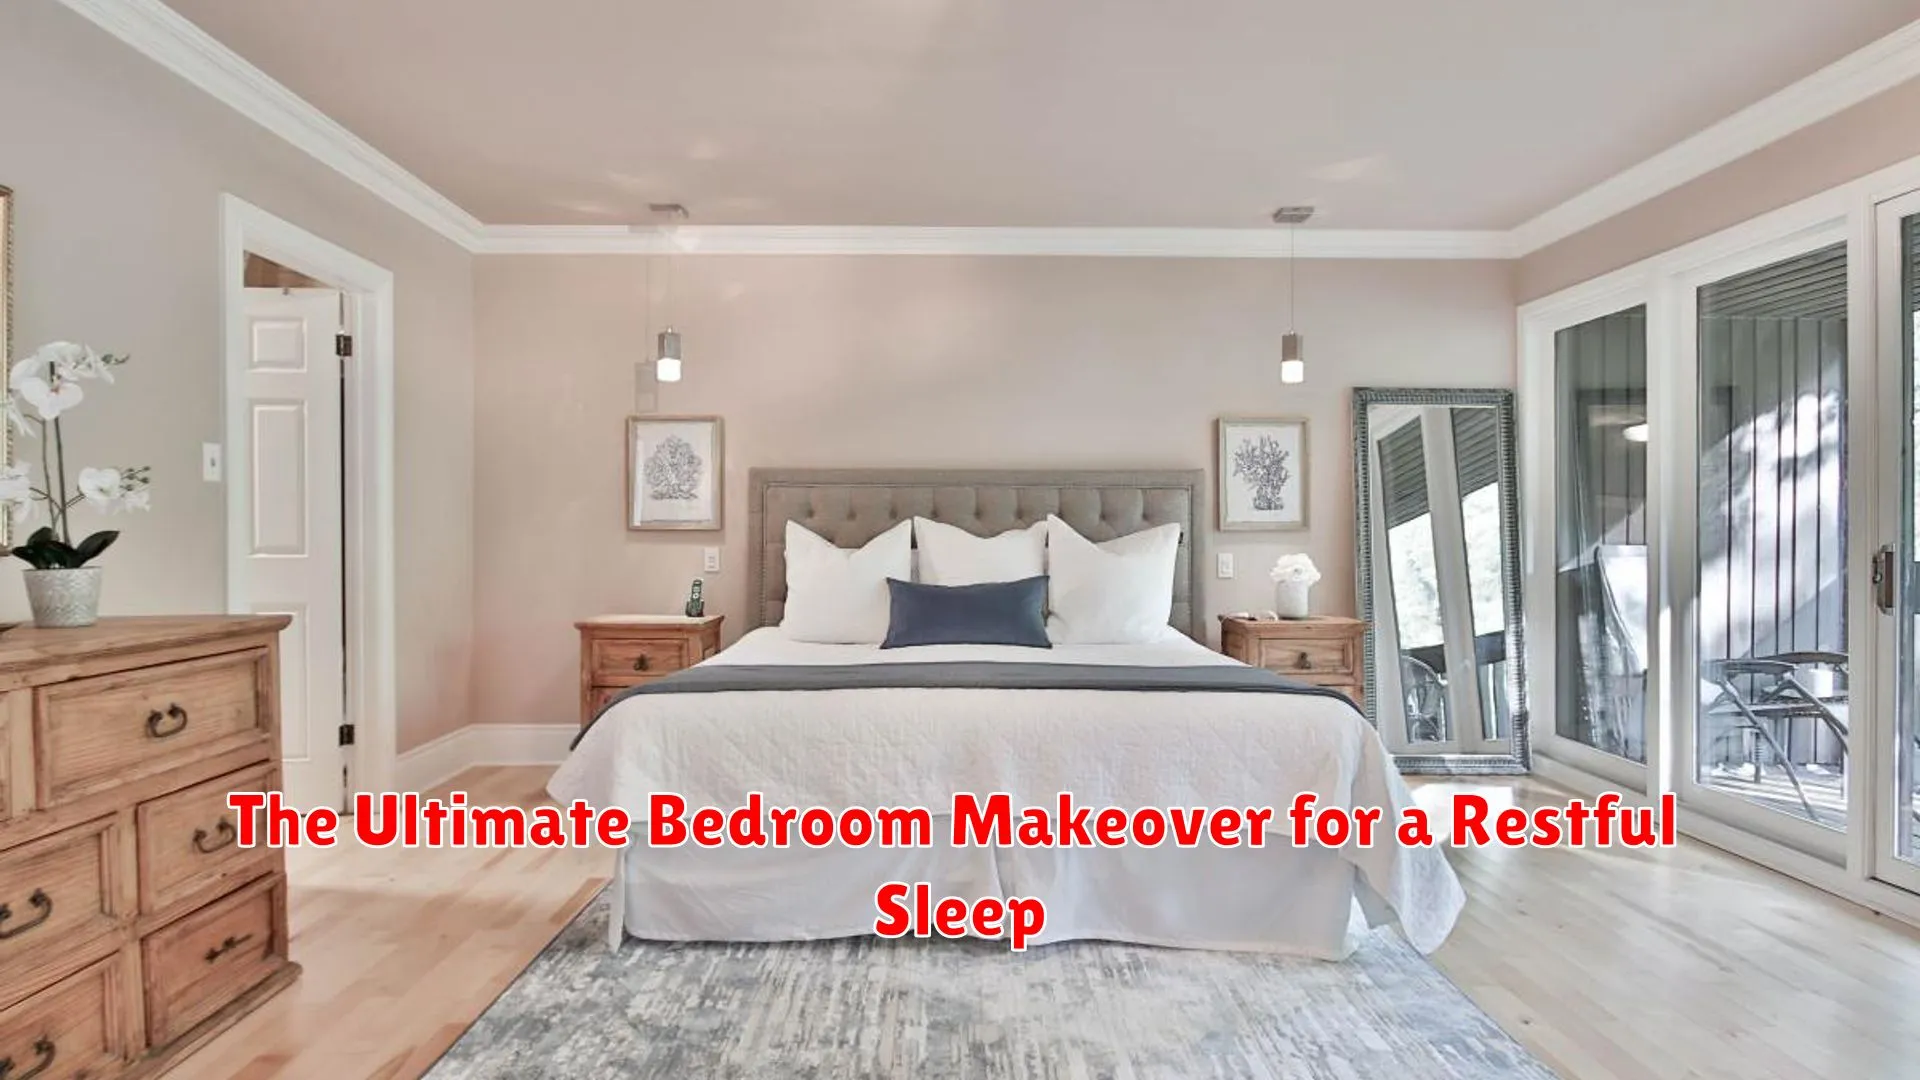 The Ultimate Bedroom Makeover for a Restful Sleep